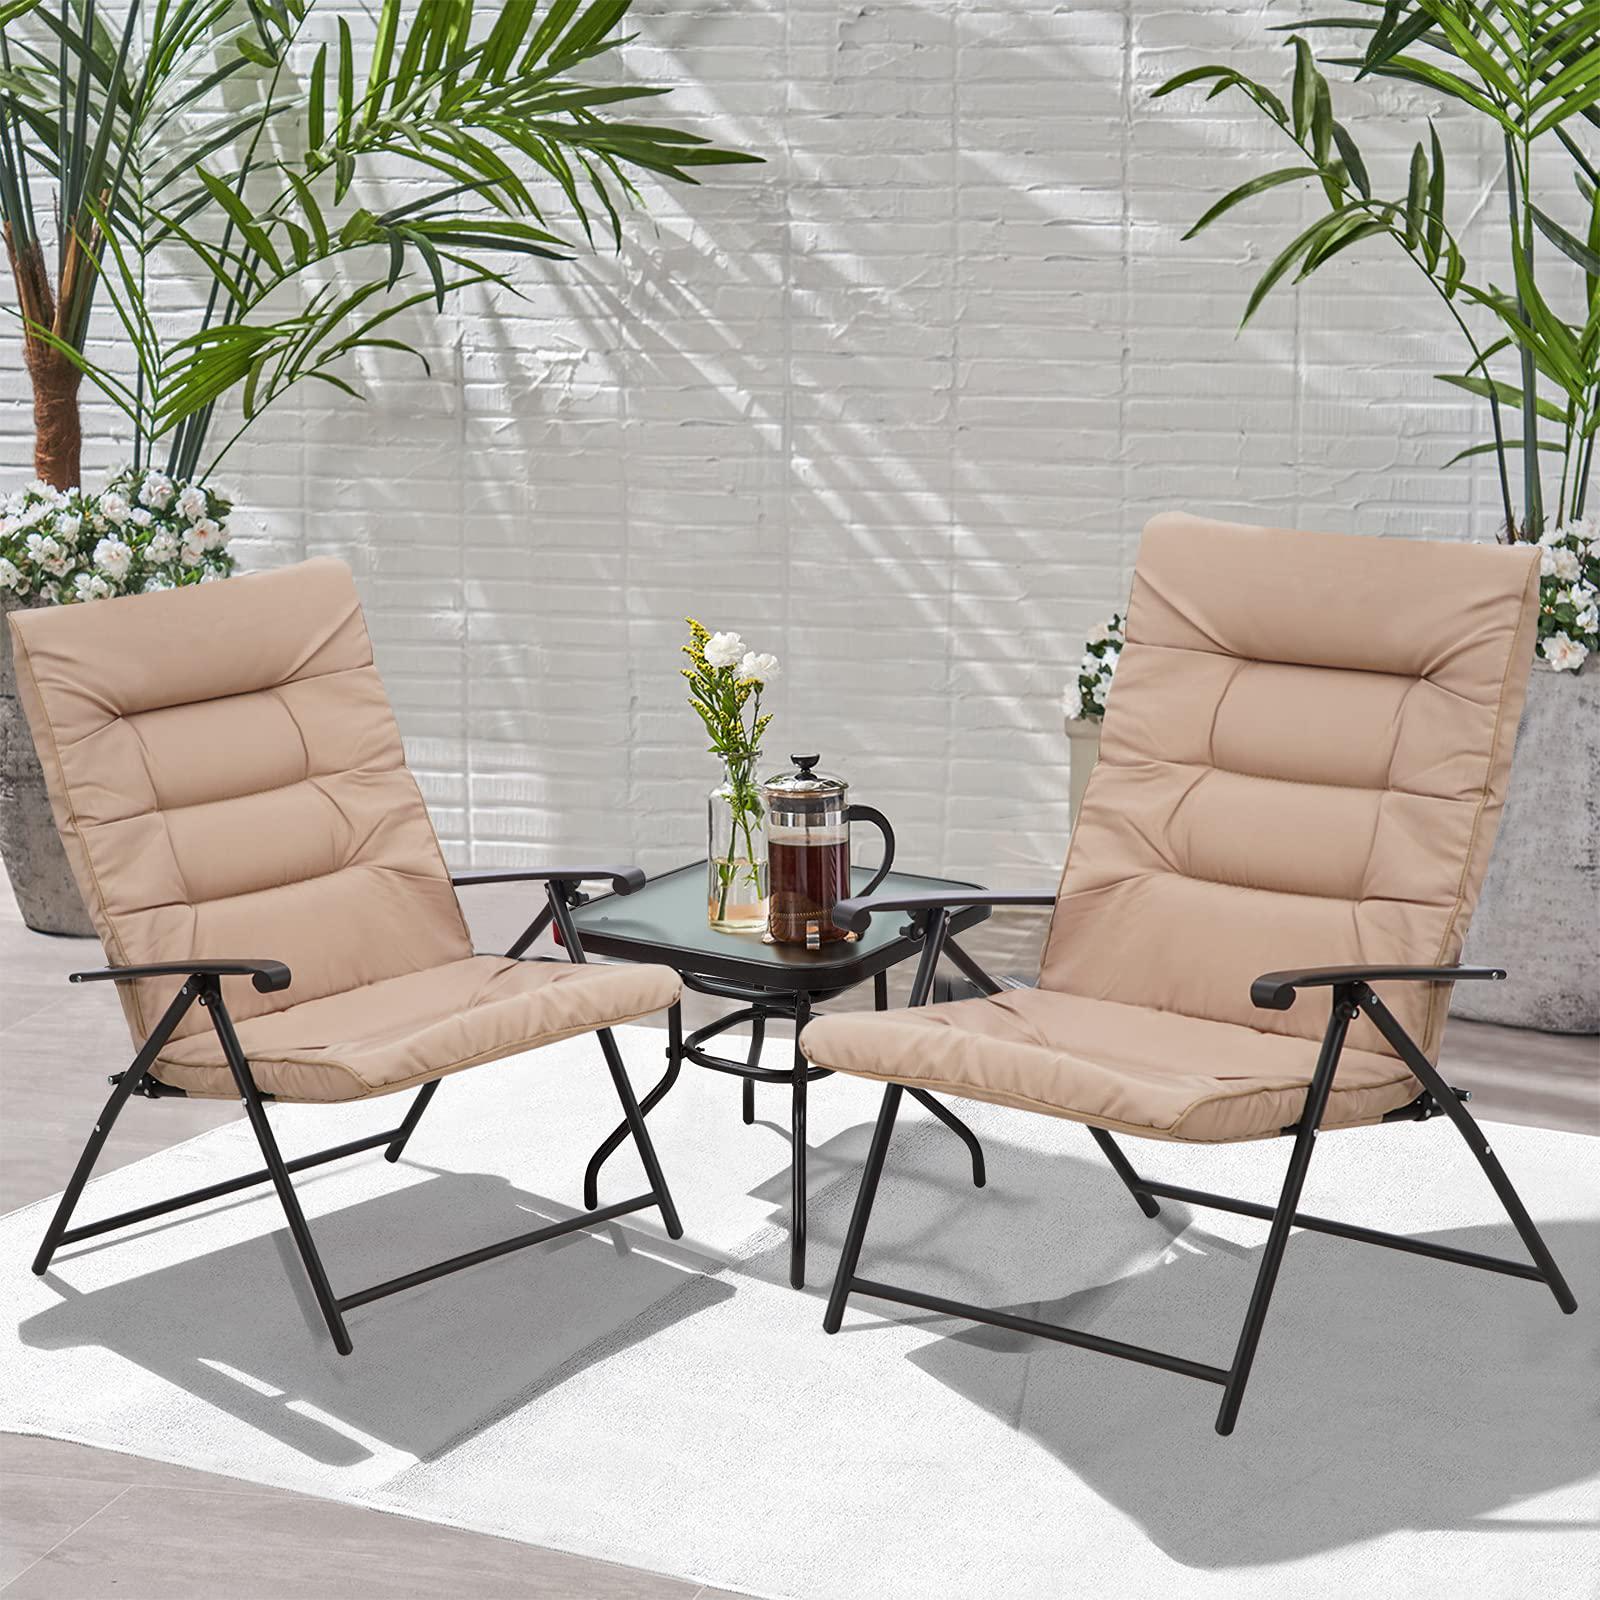 suncrown 3-piece outdoor furniture patio padded folding chair set patio bistro set foldable adjustable reclining lounge chair